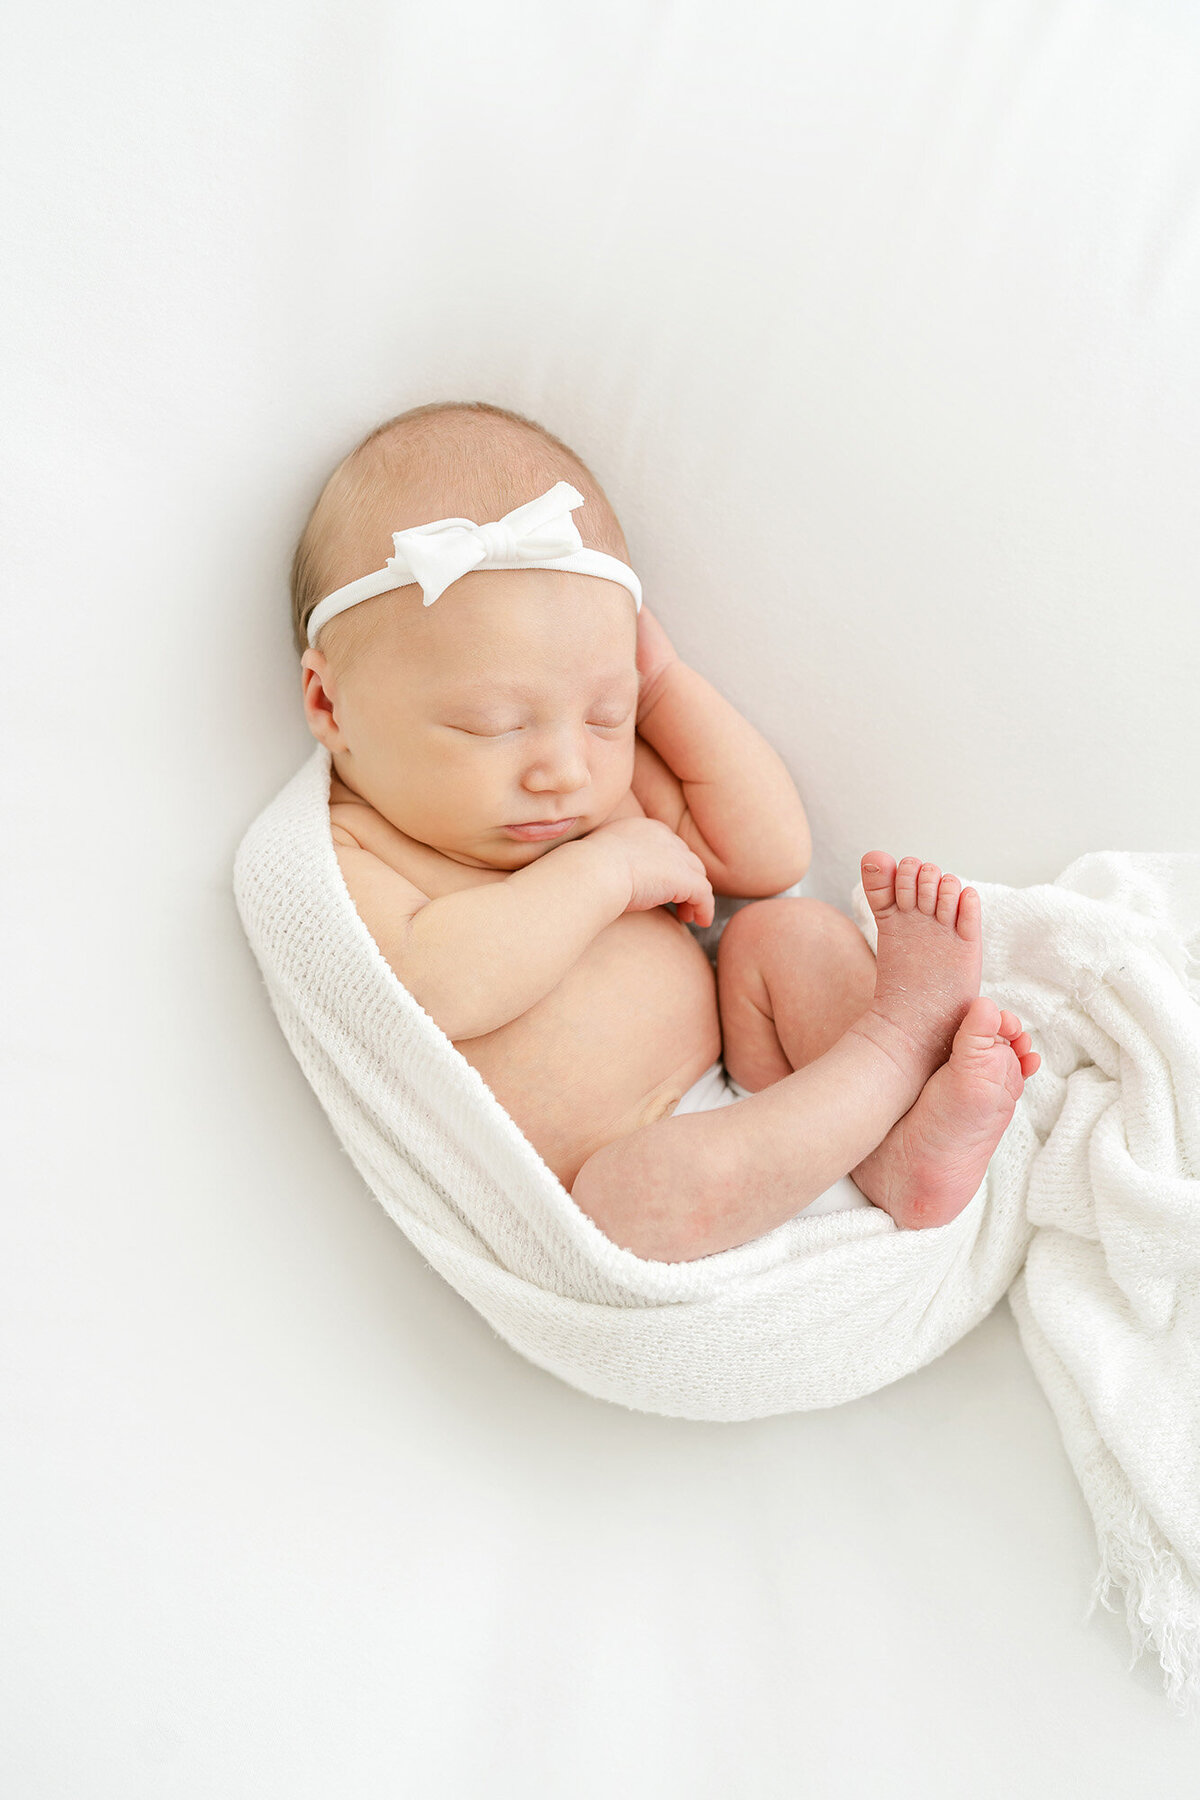 newborn photography session with relaxed, sleeping baby girl in Louisville Ky at Julie Brock Photography Studio